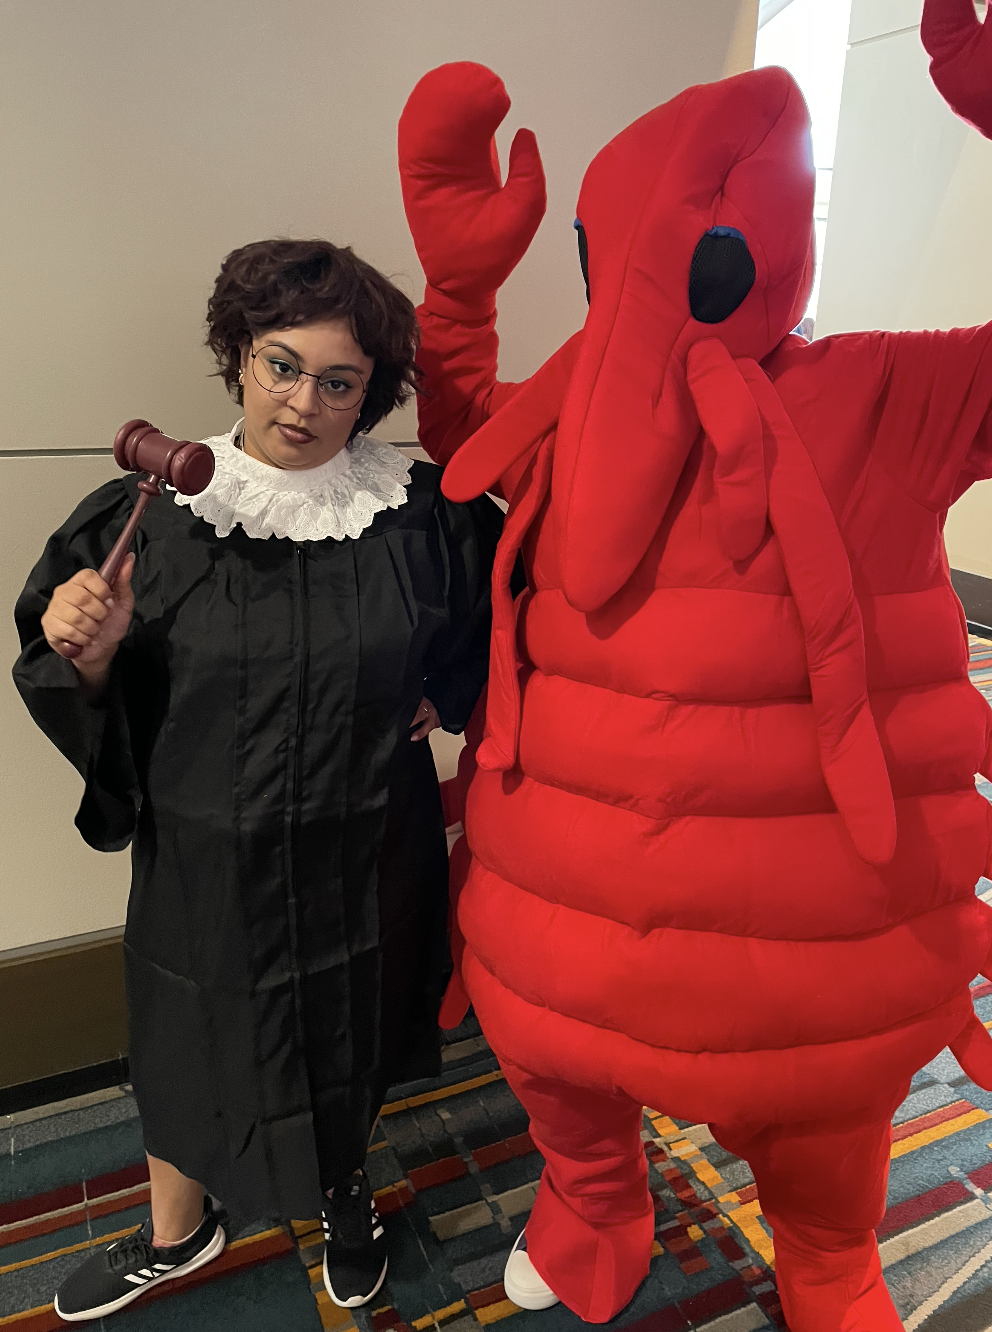 Woman in judge costume stands with woman in lobster costume